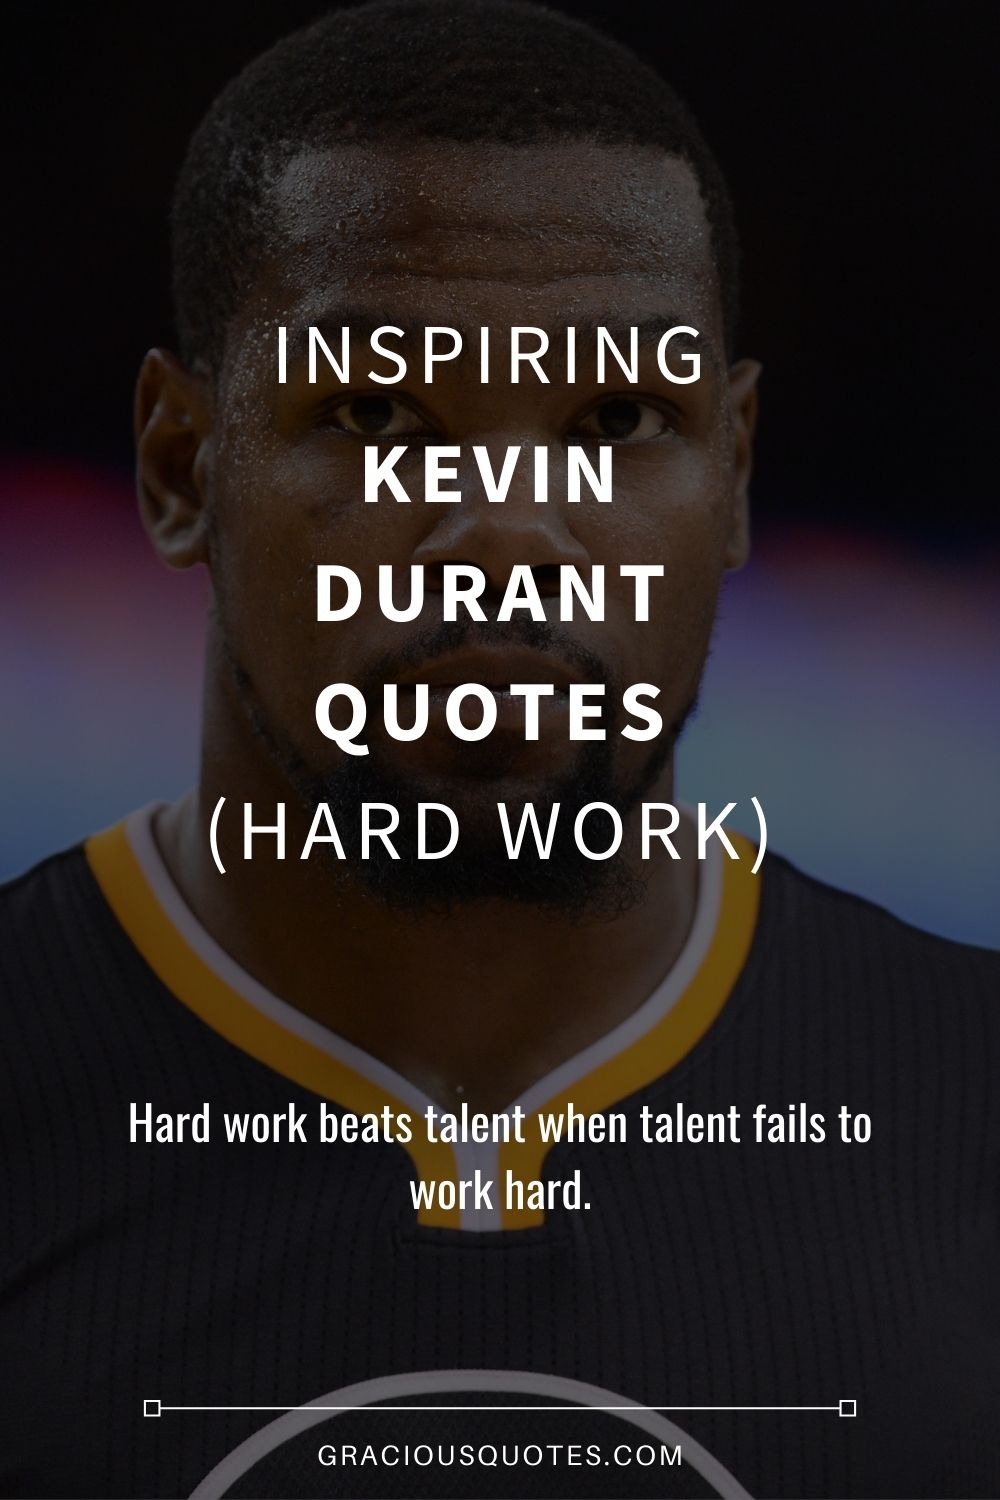 Inspiring Kevin Durant Quotes (HARD WORK) - Gracious Quotes